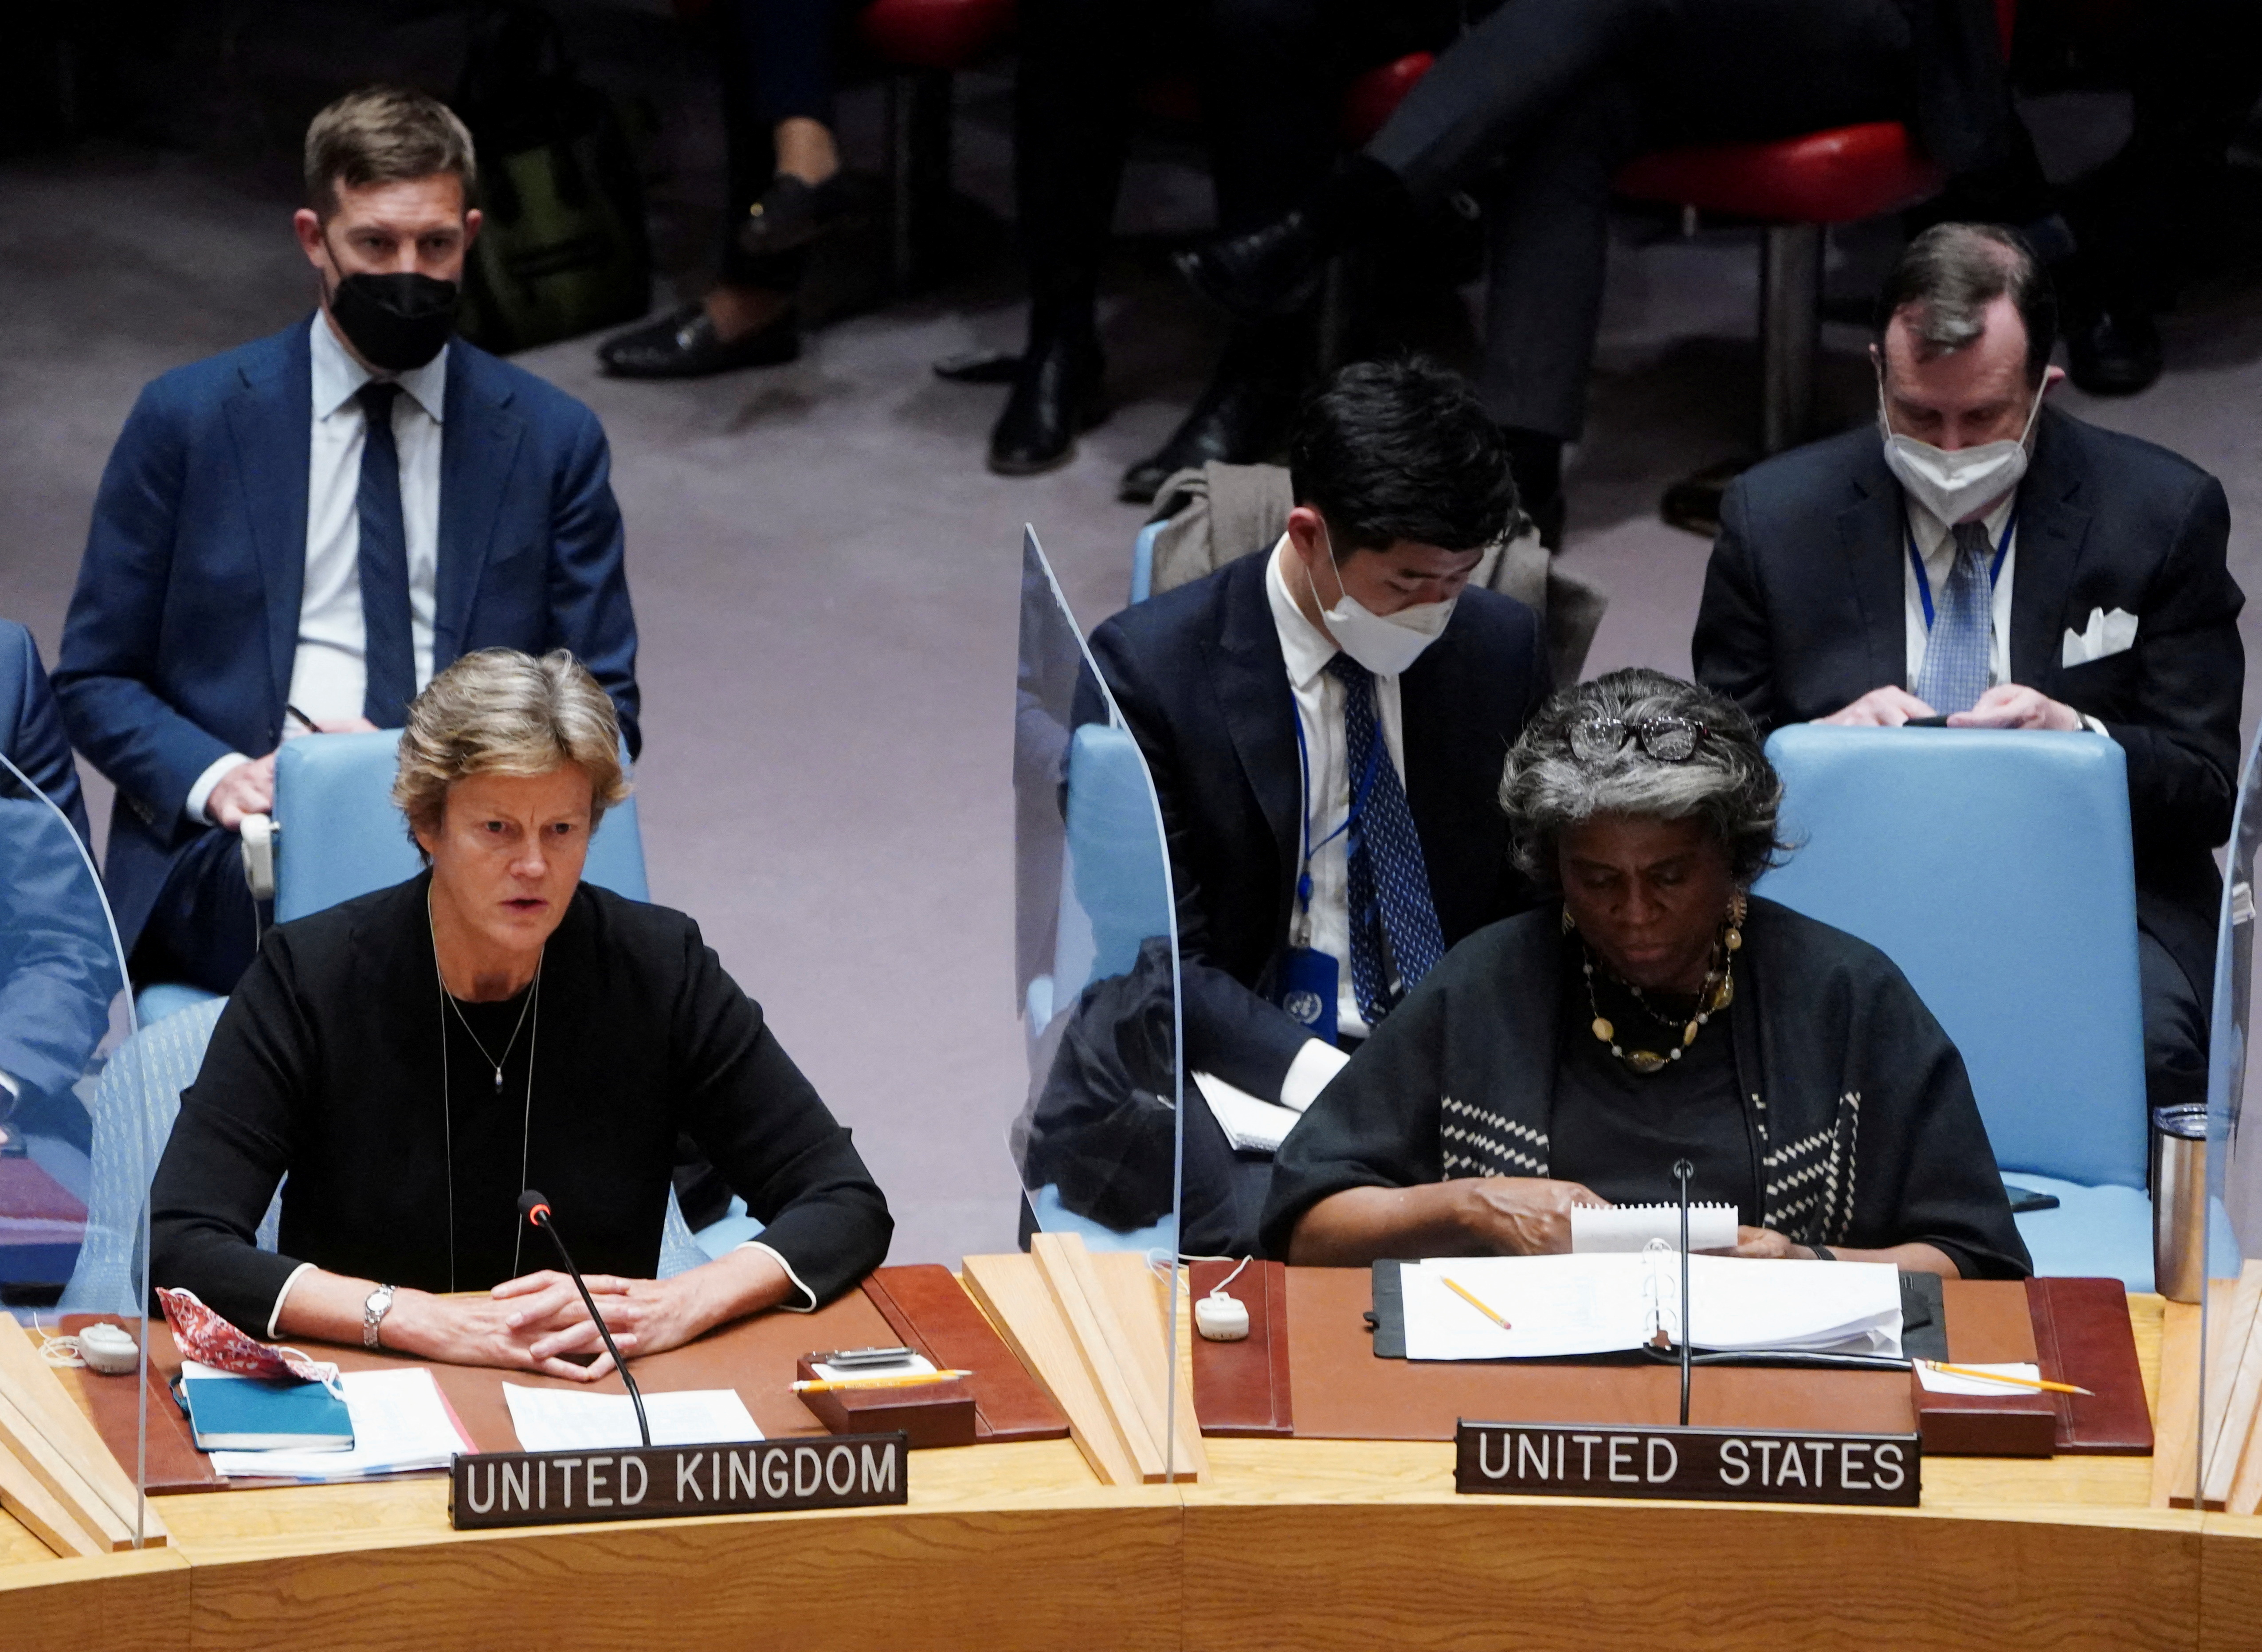 British Ambassador to the UN Barbara Woodward (L) and US Ambassador to the UN Linda Thomas-Greenfield (R) attend the United Nations Security Council meeting to discuss the ongoing crisis in Ukraine in New York City on February 23.